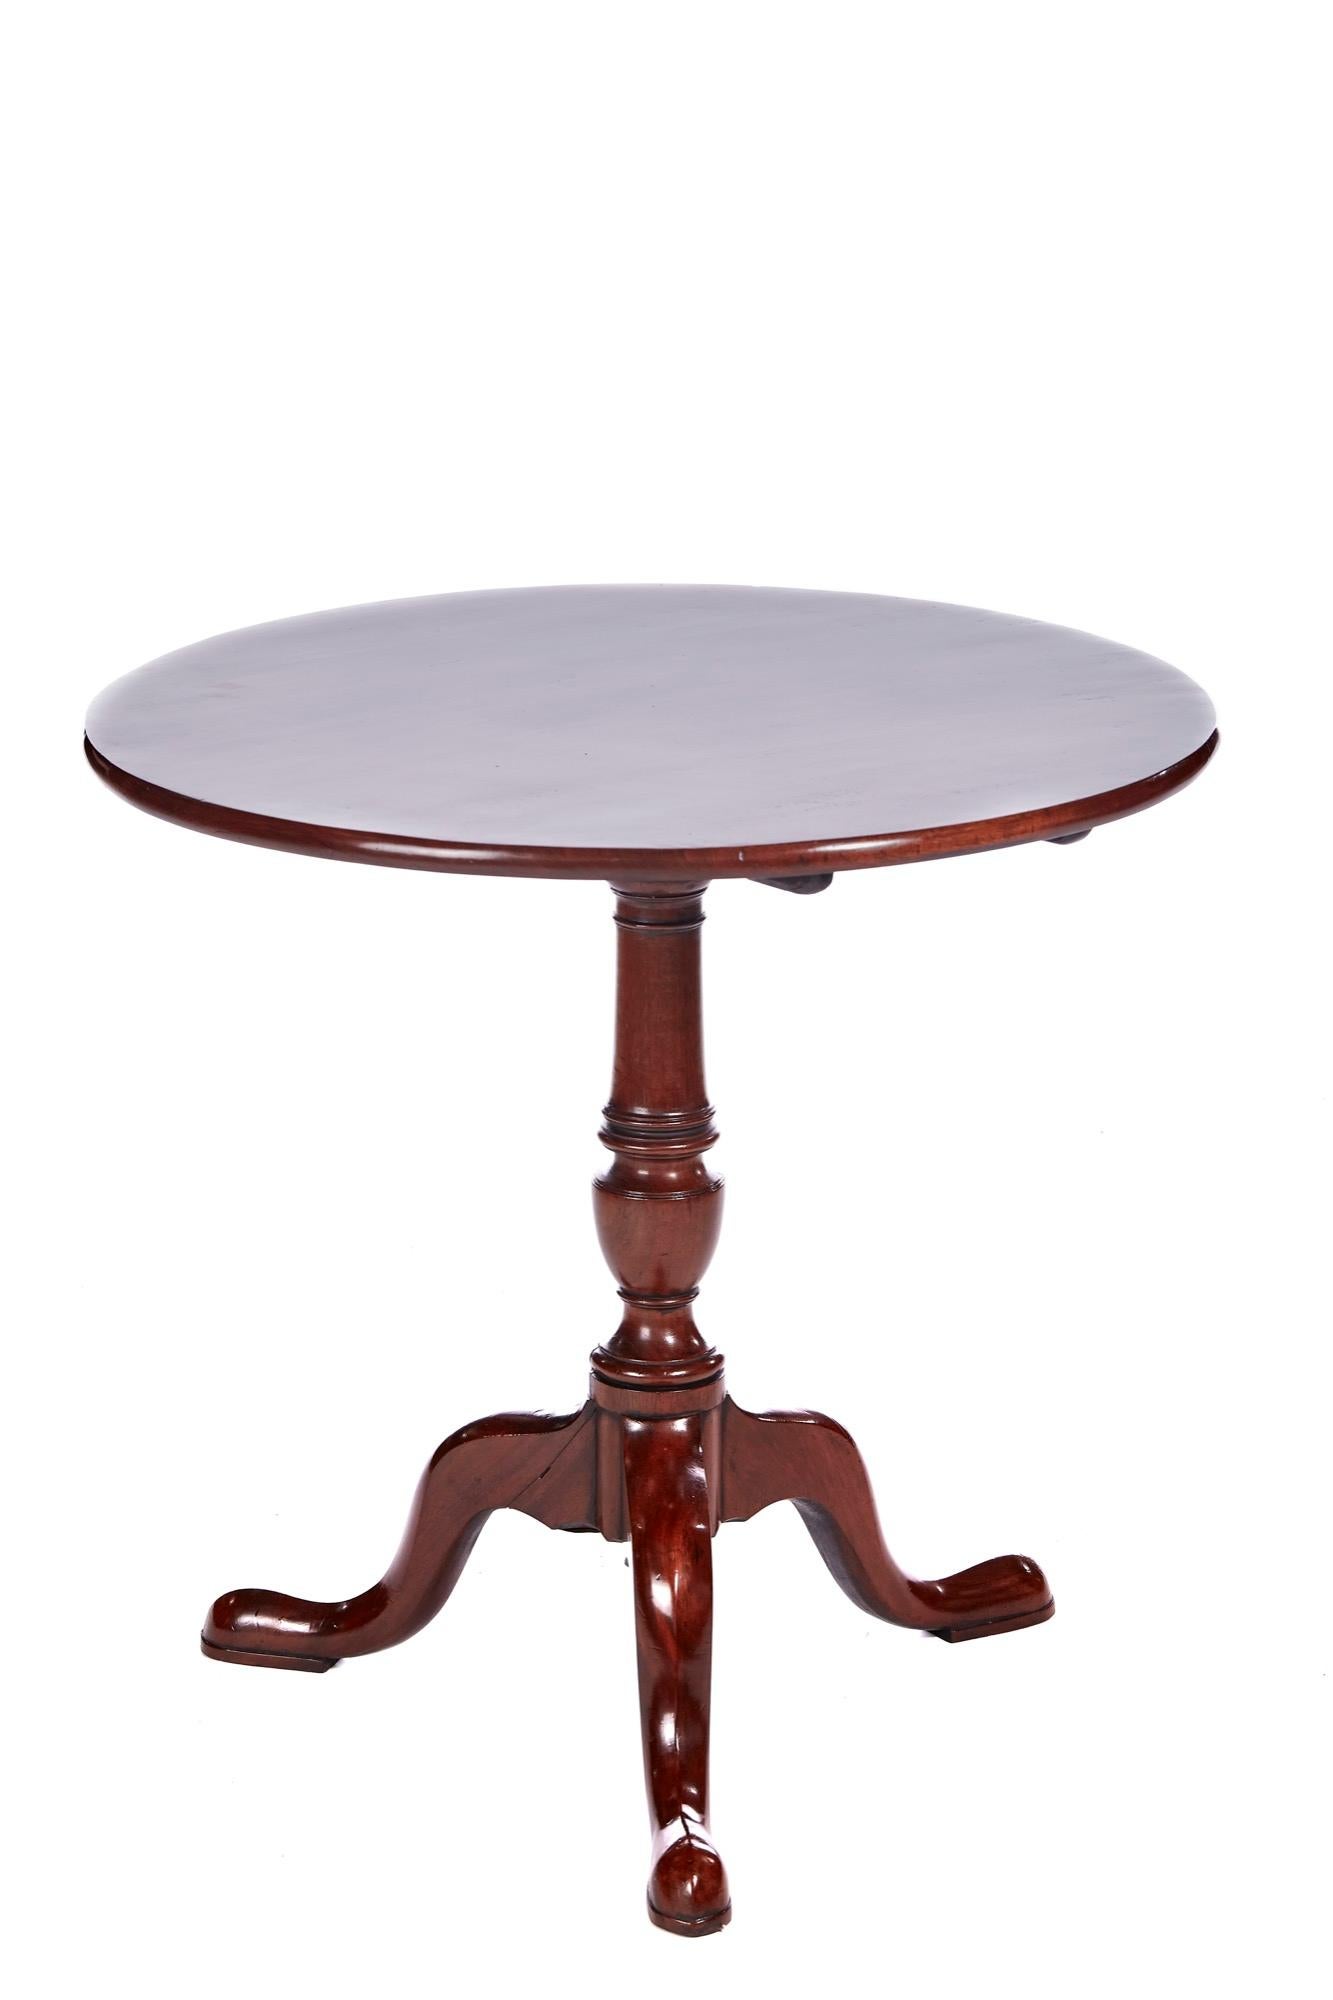 Antique Georgian mahogany tripod table having a quality mahogany round top supported by a shaped turned column raised by 3 shaped cabriole legs with pad feet.
Lovely color and condition.
Measures: 29